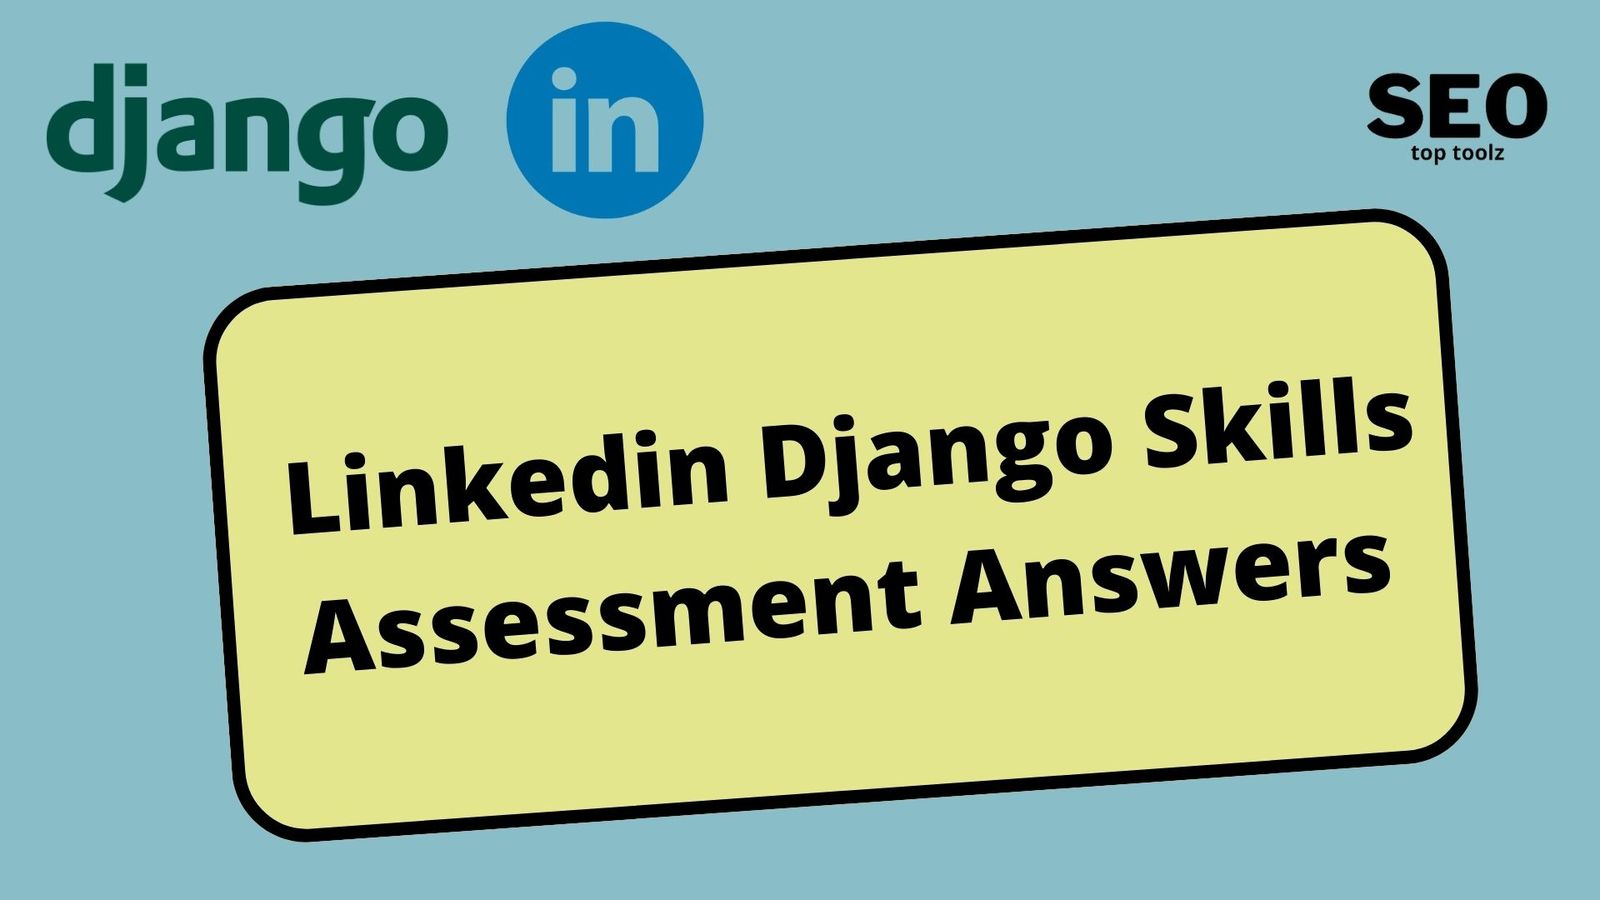 linkedin django skills assessment answer *expert, linkedin django assessment answers 2023, linkedin django assessment, linkedin django assessment answers 2023, django linkedin assessment, django linkedin assessment github, django linkedin assessment, linkedin skills assessment answers, to cache your entire site for an application in django, you add all except which of these settings?, microsoft azure assessment linkedin answers, which helper function is not provided as part of the django.shortcuts package, linkedin python skills assessment answers, django linkedin assessment, which helper function is not provided as part of the django shortcuts package, linkedin skills assessment answers, linkedin python skills assessment answers, which is not part of djangos design philosophy, how would you define the relationship between a star and a constellation in a django model, to cache your entire site for an application in django you add all except which of these settings, microsoft azure assessment linkedin answers ,Access database practice test, access skills test, adobe xd linkedin assessment, agile linkedin test, agile methodologies linkedin quiz, all linkedin skill assessments, assessment linkedin, digital garage answers 2022, EMrush Local SEO Exam Answers, excel test linkedin, fundamentals of digital marketing final exam answers 2022, google ads certification answers 2022, google ads display assessment answers 2022, google ads display certification answers 2022, google ads search assessment answers 2022, google ads search certification answers, google analytics certification answers 2022, google analytics individual qualification exam answers 2022, google digital garage answers, google digital garage final exam answers 2022, google digital marketing answers 2022, google digital marketing course answers, google digital marketing final exam answers 2022, google digital marketing garage certification final exam answers 2022, google digital unlocked answers, Google Exam Answers, google fundamentals of digital marketing answers 2022, google garage digital marketing answers 2022, How to Pass Microsoft Access Test, html test linkedin, Hubspot Inbound Marketing Certification Exam Answers 2022, HubSpot Solutions Partner Certification Test Answers Updated 2022, it operations assessment linkedin answers, java skill assessment test linkedin, javascript linkedin assessment, linked in excel test, linked in skill assessments, linked in skills test, linked in test, LinkedIn .NET Framework Quiz Answers 2022, LinkedIn Android Assessment Questions and Answers 2022, LinkedIn Angularjs Assessment Test Answers 2022, linkedin aptitude test, linkedin assessment, linkedin assessment quiz, linkedin assessment quiz answers, linkedin assessment test, linkedin badge test, LinkedIn C Objective Assessment Test Answers 2022 - Linkedin C Objective Skill Assessment Quiz Test Answers 2022, LinkedIn Cascading Style Sheets CSS Assessment Test Answers 2022, linkedin css assessment, linkedin css test, Linkedin Django Skills Assessment Answers 2022 Updated, linkedin exams, linkedin excel assessment, LinkedIn Hadoop Skill Assessment Answers 2022, linkedin html quiz, linkedin html test, linkedin javascript assessment, LinkedIn jQuery Skills Assessment Test Answers 2022, LinkedIn JSON Assessment Test Answers 2022, LinkedIn Linux Skill Assessment Quiz Answers 2022, LinkedIn MATLAB Assessment Test Answers 2022 - LinkedIn Skill Assessment MATLAB - Quiz - Test 2022, LinkedIn Maven Skill Assessment Test Answers 2022, LinkedIn Microsoft Access Assessment Answers 2022- LinkedIn Microsoft Access Skill Quiz, Linkedin Microsoft Access Quiz Answers, Linkedin Microsoft Access Skill Assessment Test, Linkedin Microsoft Access Test Answers, LinkedIn Microsoft Power BI Assessment Answers 2022, LinkedIn MySQL Assessment Test Answers 2022, LinkedIn Node JS Assessment Test Answers 2022- LinkedIn Node JS Skill Assessment Quiz, LinkedIn OOP Assessment Test Answers 2022, LinkedIn OOP Assessment Test Answers 2022 - Object Oriented Programming Assessment LinkedIn Test Answers 2022, linkedin php test, linkedin python assessment answers 2022, linkedin python assessment quizlet, linkedin python assessment reddit, linkedin quiz, linkedin r programming test, LinkedIn ReactJS Assessment Test Answers 2022, LinkedIn Rest API Skills Assessment Quiz, linkedin skill assessment, linkedin skill assessment answers, linkedin skill assessment answers 2022, linkedin skill assessment answers excel, linkedin skill assessment badge, linkedin skill assessment github, linkedin skill assessment practice, linkedin skill assessment reddit, linkedin skill assessment test, linkedin skill assessments, linkedin skill quiz, linkedin skill test, linkedin test, linkedin test skills, LinkedIn Transact SQL Assessment Test Answers 2022, linkedin typing test, LinkedIn Visio Assessment Test Answers 2022, linkedin xml assessment answers, LinkedIn XML Assessment Test Answers 2022, linkedinskillassessment, machine learning linkedin assessment, matlab assessment linkedin, Microsoft Access assessment LinkedIn, Microsoft Access Assessment Test, Microsoft access practice exam pdf, Microsoft access skills, Microsoft access test questions and answers, Microsoft access test Quizlet, microsoft powerpoint linkedin assessment, MongoDB LinkedIn Assessment Test Answers 2022- LinkedIn MongoDB Quiz Answers 2022, ms access exam questions and answers pdf, php assessment linkedin, python assessment linkedin answers, react linkedin assessment, SEMrush Advanced Competitive Research Certification Answers, SEMrush Advertising Toolkit Test, SEMrush Backlink Management Exam Answers 2022, SEMrush Backlink Management Exam Answers 2022 - SEMrush Backlink Management Certification Test Answers 20212, SEMrush Competitive Analysis, SEMrush Keyword Research, SEMrush Link Building Test Answers, SEMrush Mobile SEO Exam, SEMrush Rank Tracking Test Answers, SEMrush Role of Content, Semrush SEO Fundamentals Answers, SEMrush SEO Toolkit Answers, SEMrush Social Media Toolkit Test, SEMrush Technical SEO, skill assessment linkedin, skill assessment test linkedin, skill quiz linkedin, skill test linkedin, spring framework linkedin assessment, Test Answers 2022, test linkedin, test linkedin excel, what is the correct syntax for creating a variable that is